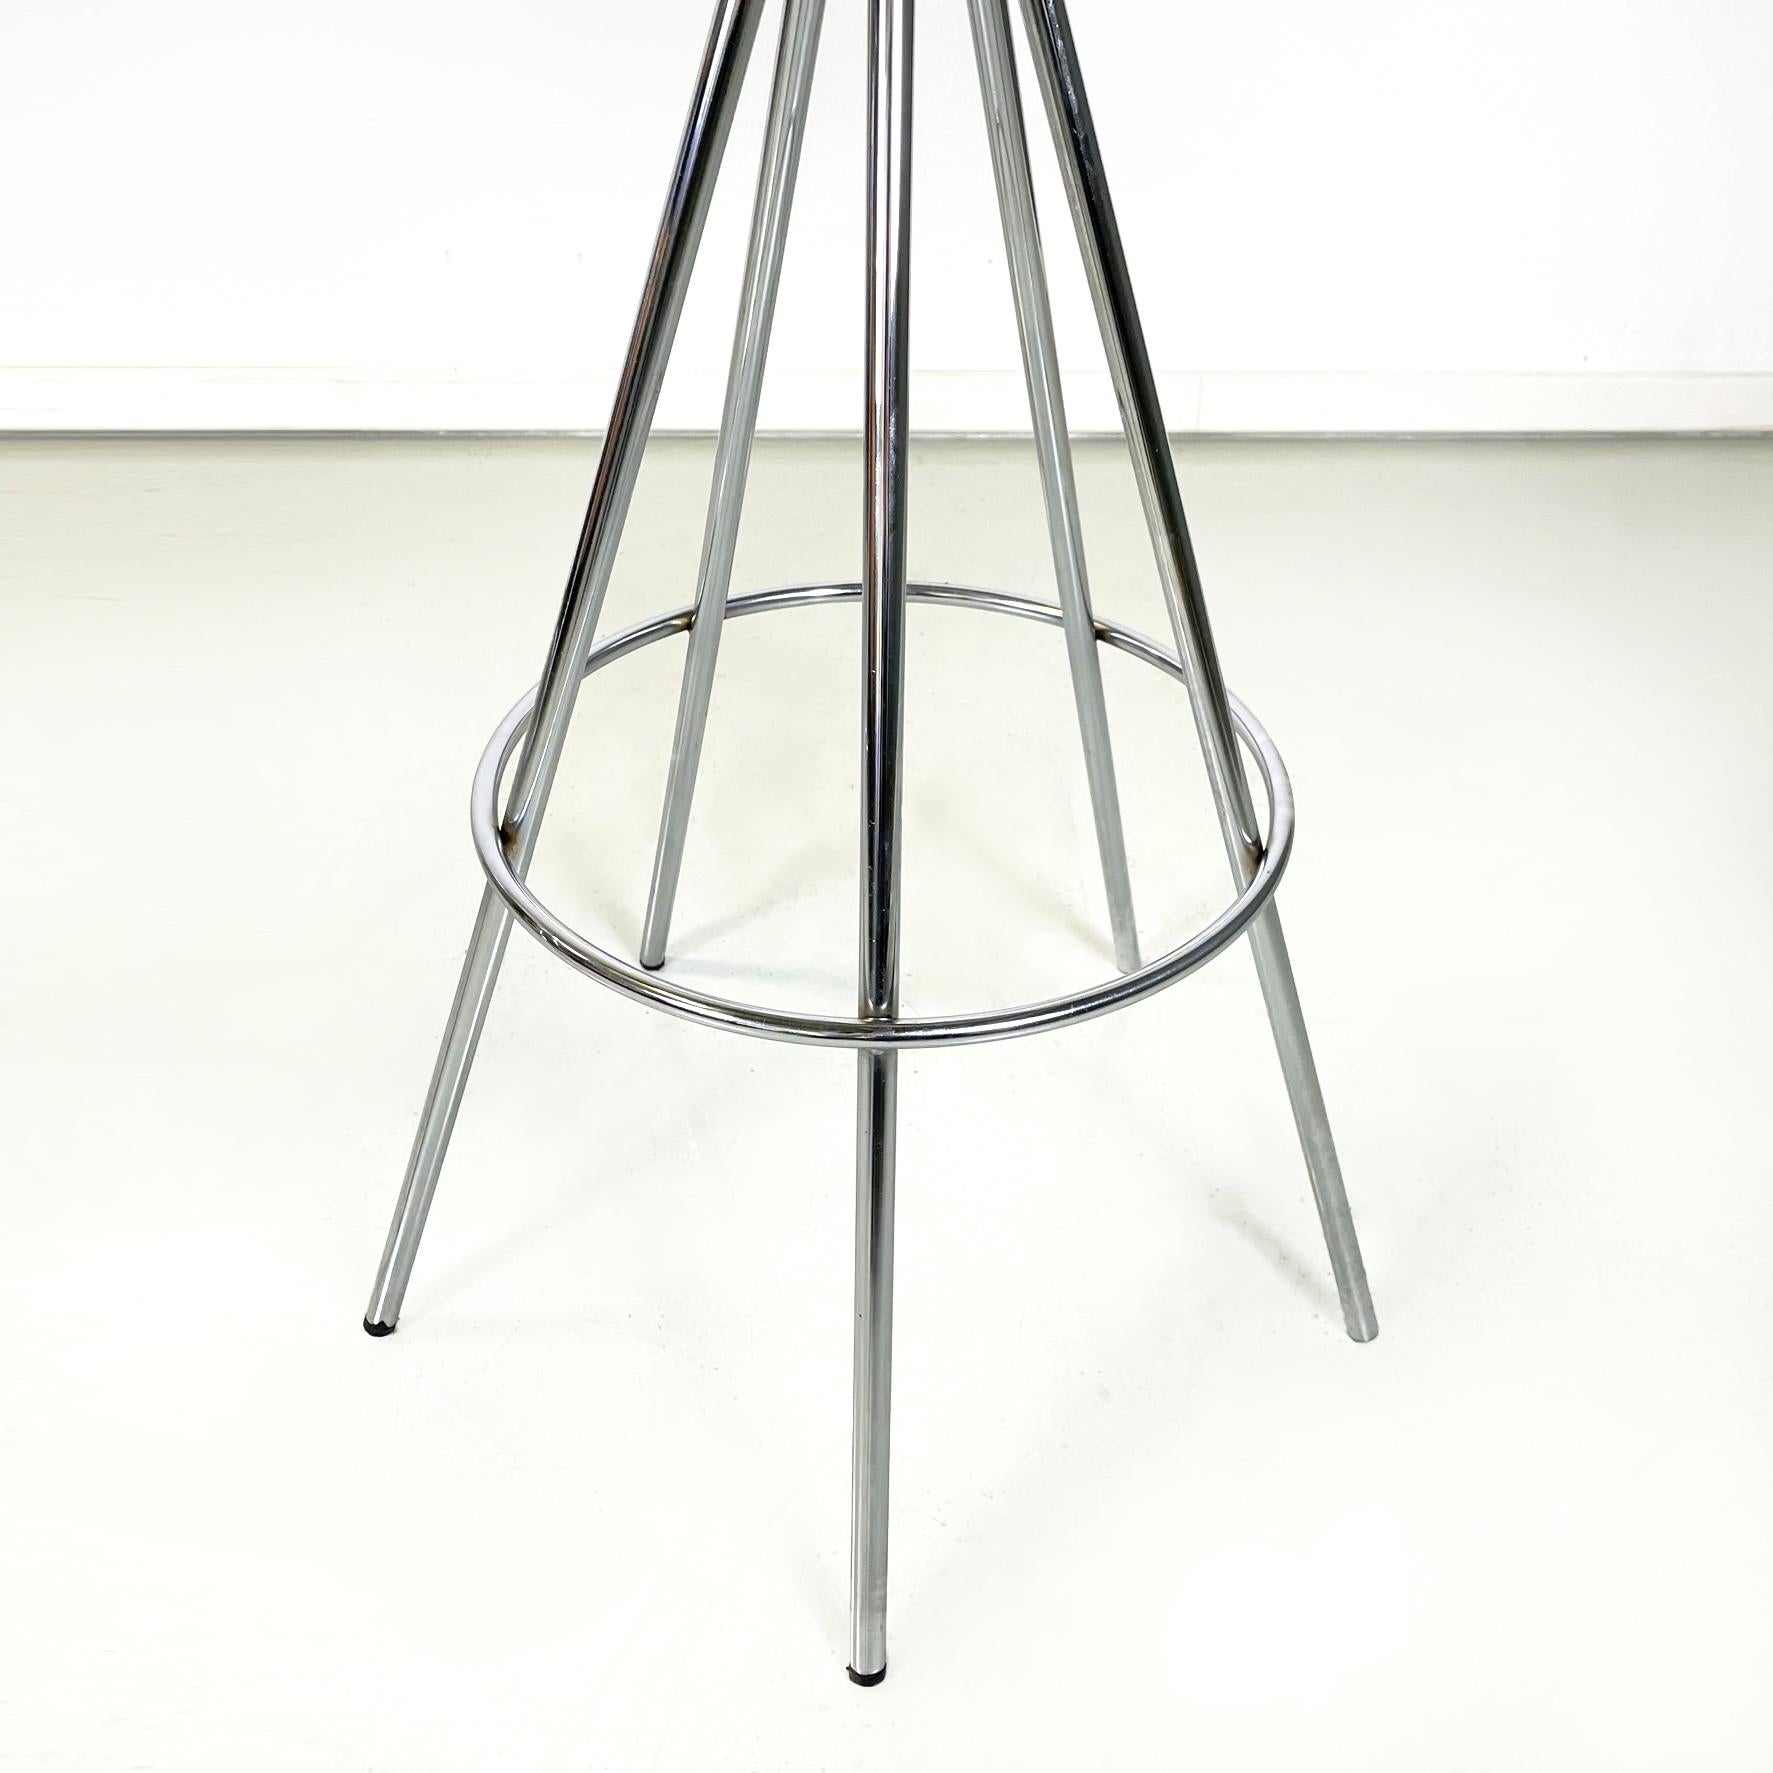 Spanish Post-Modern Bar Stools Jamaica by Pepe Cortés for Bd Barcellona, 2000s For Sale 7